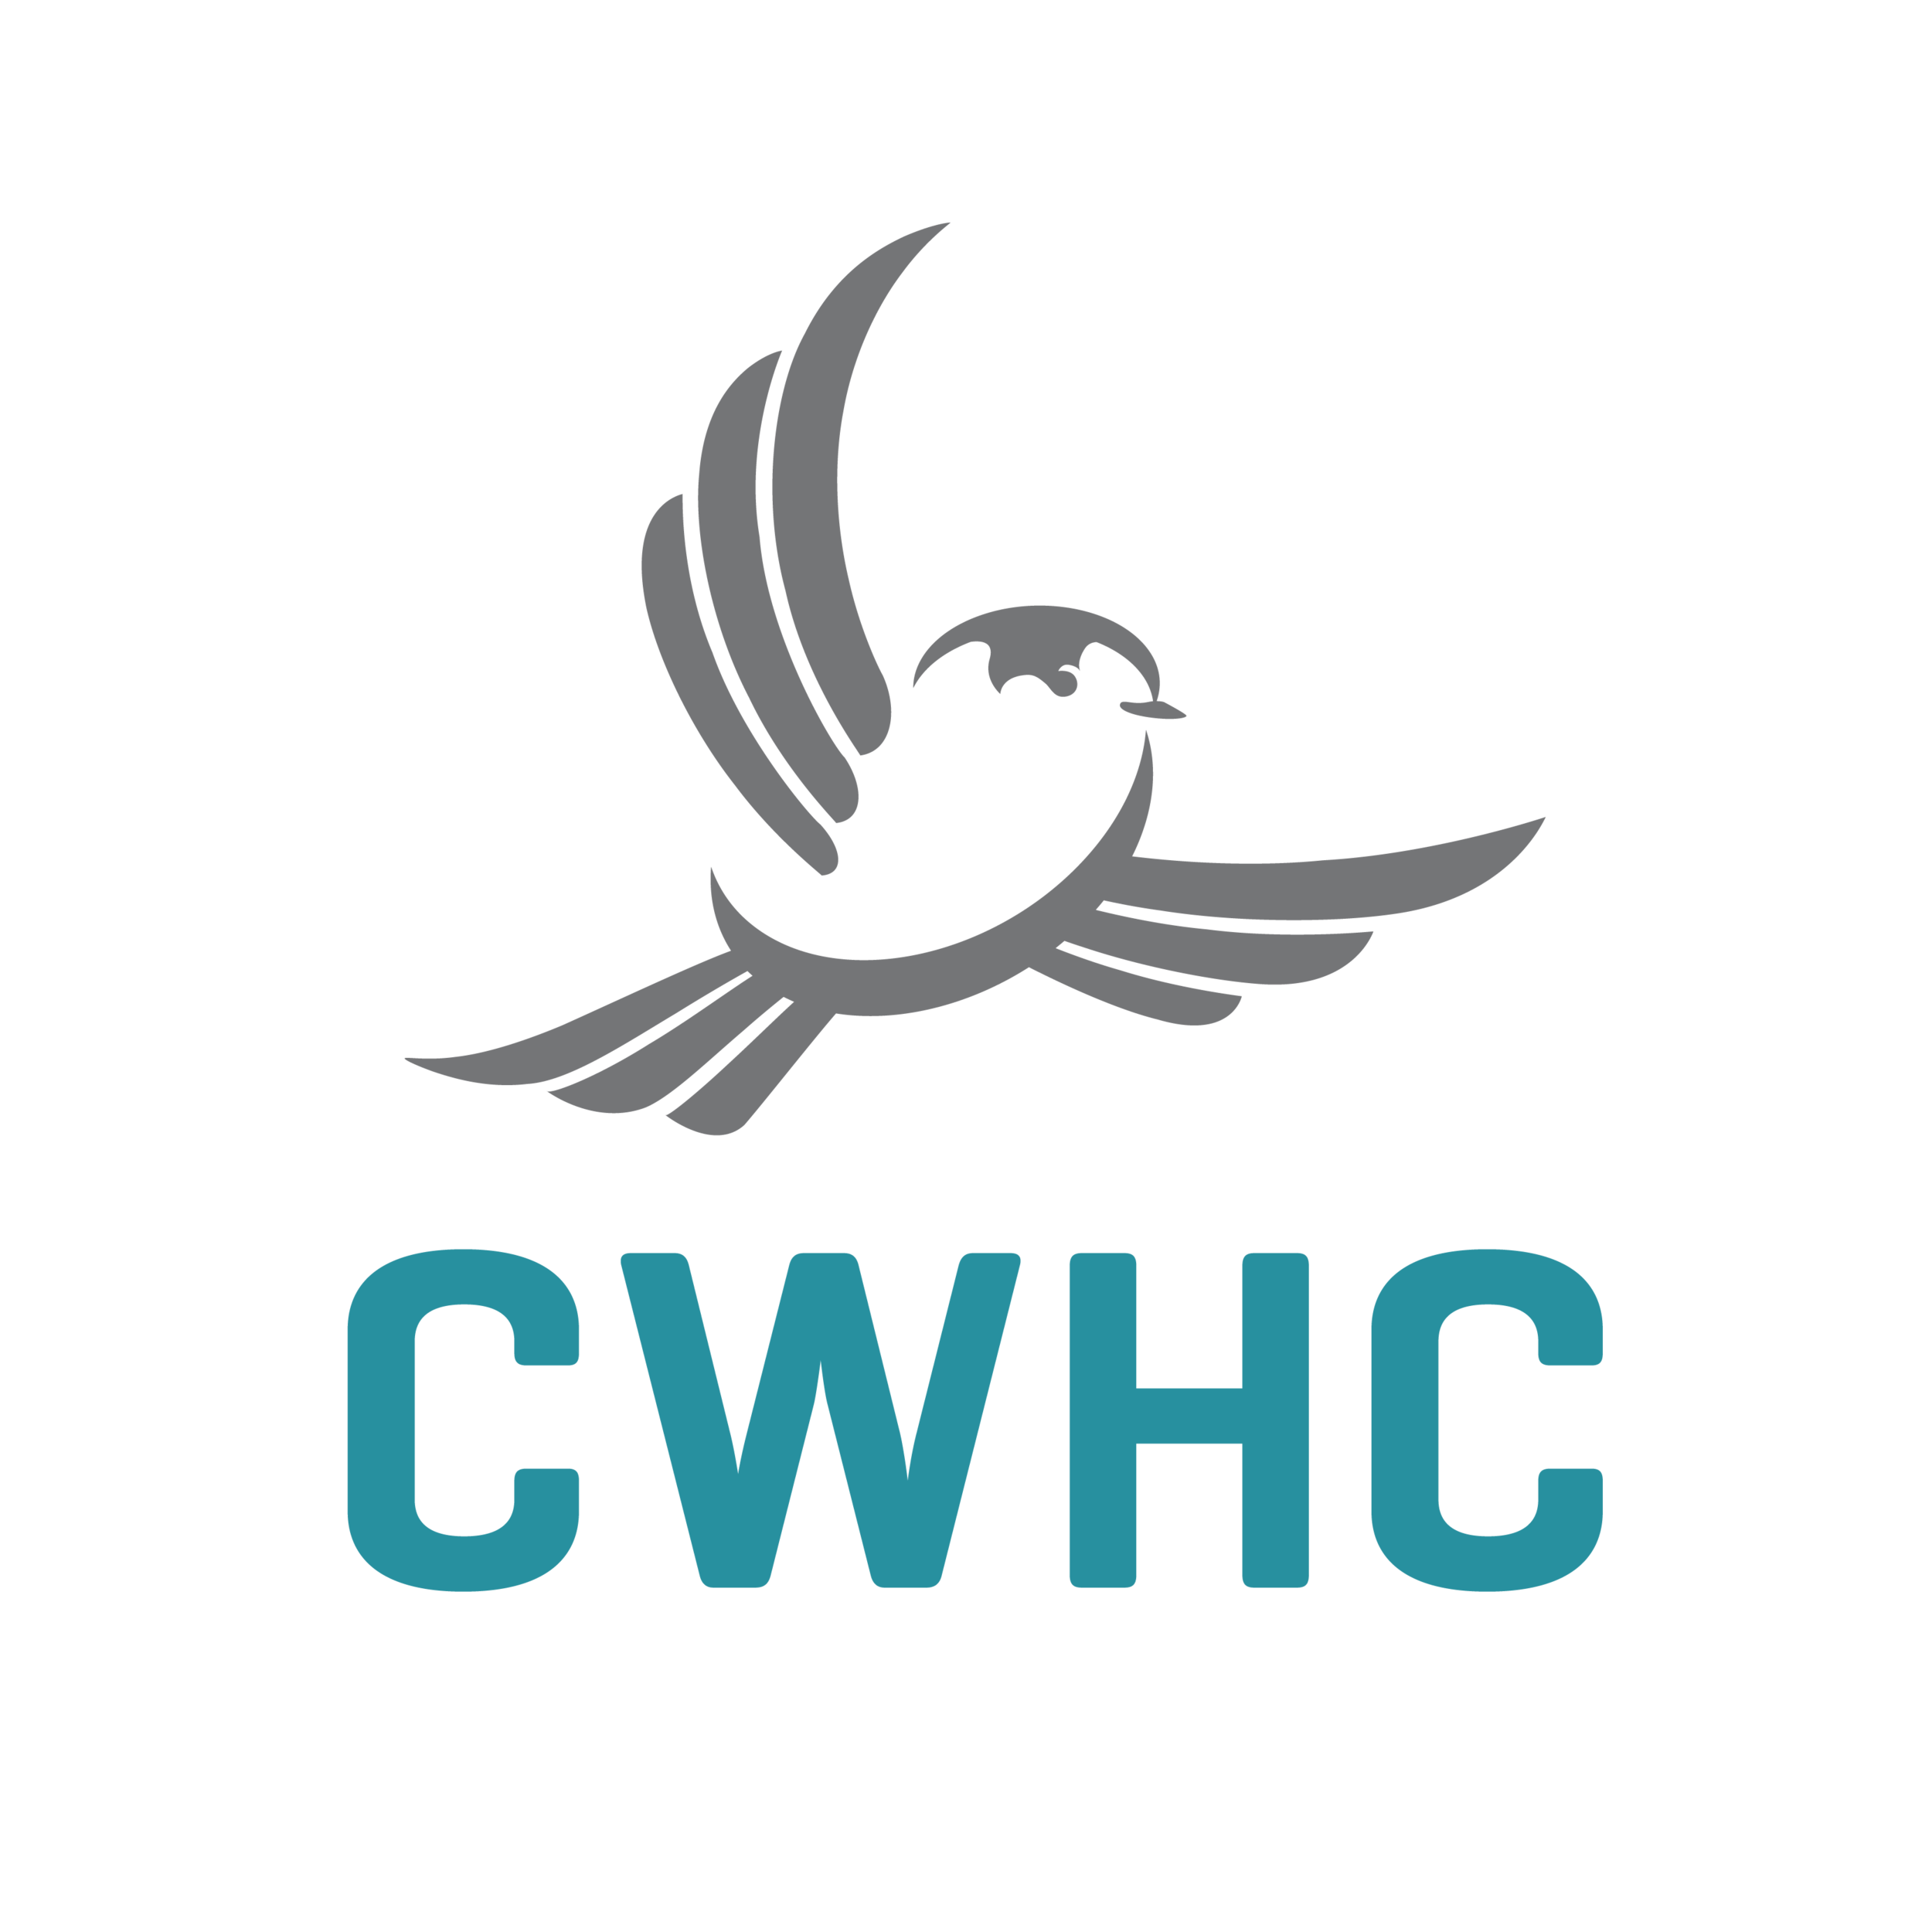 Image of the CWHC logo, which includes a grey outline of a bird above blue text reading CWHC.